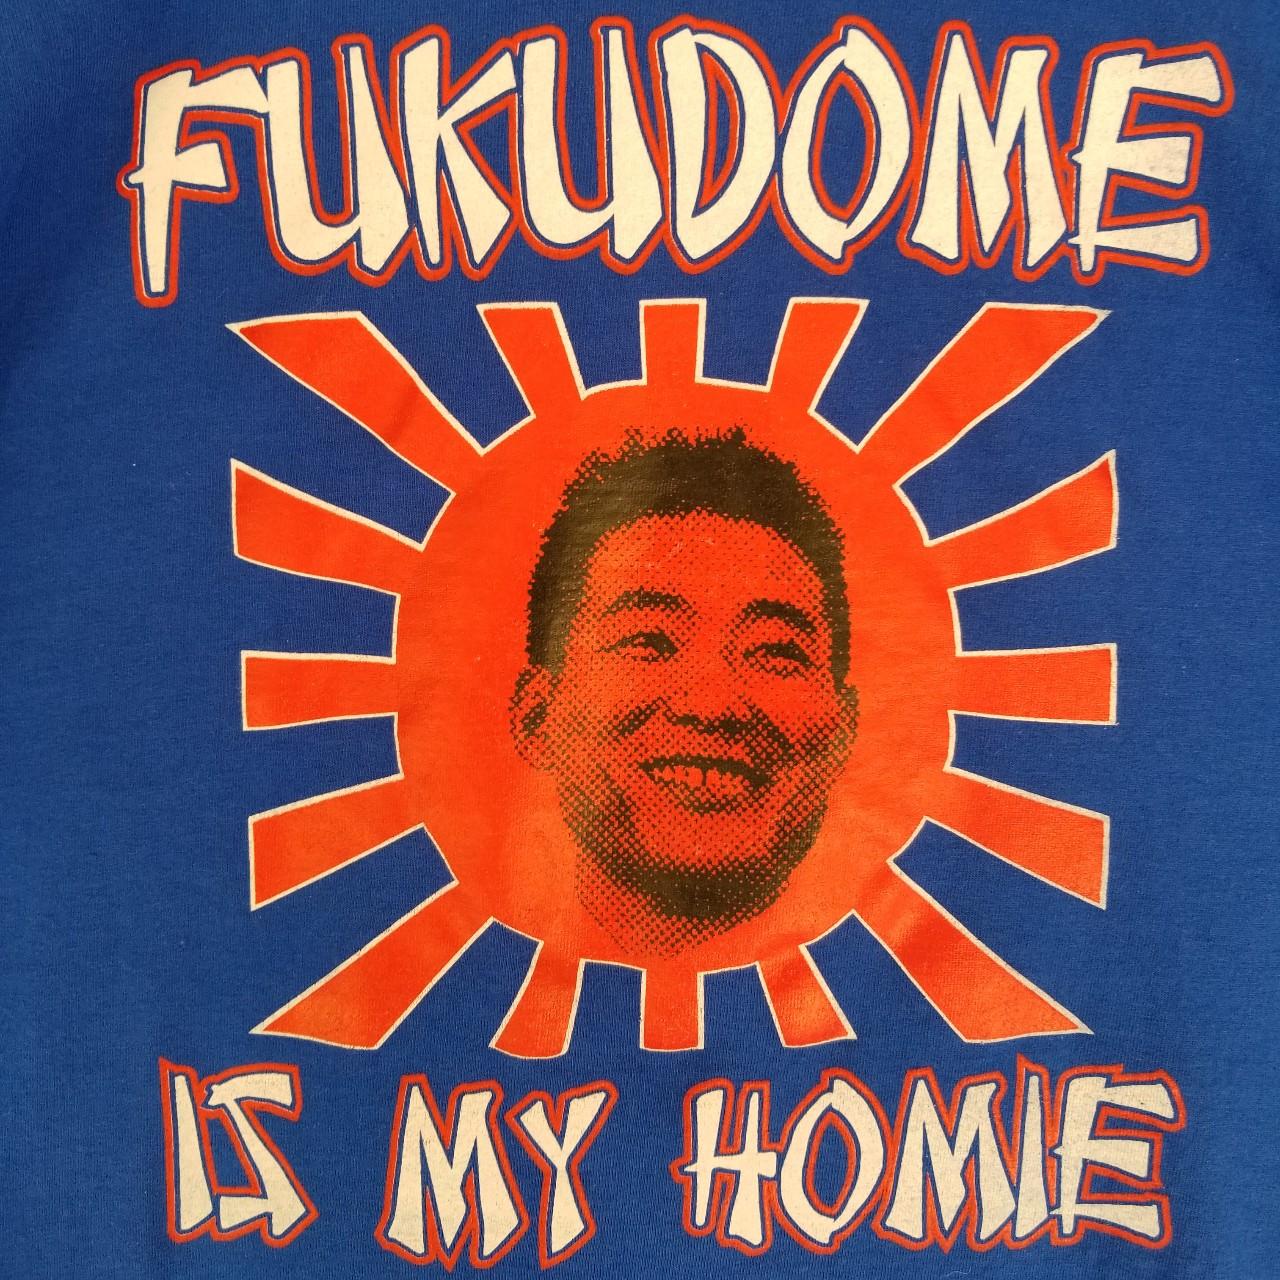 Fukudome is my Homie up for grabs. In 2008 - Depop